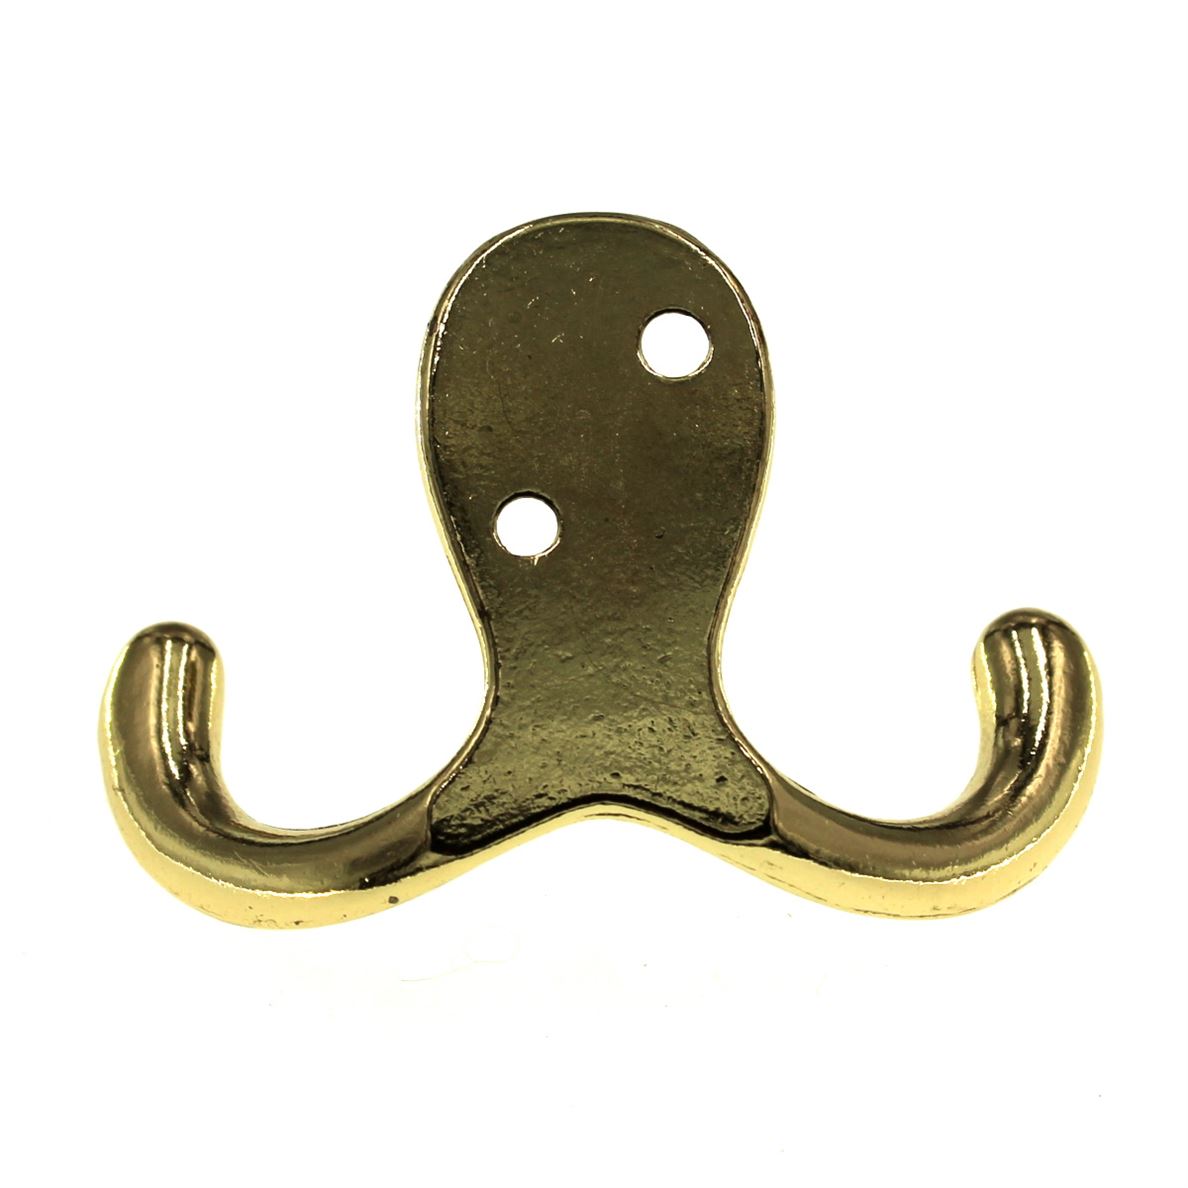 Steel Traditional Double Prong Coat Hook 241-421 - Antique Brass